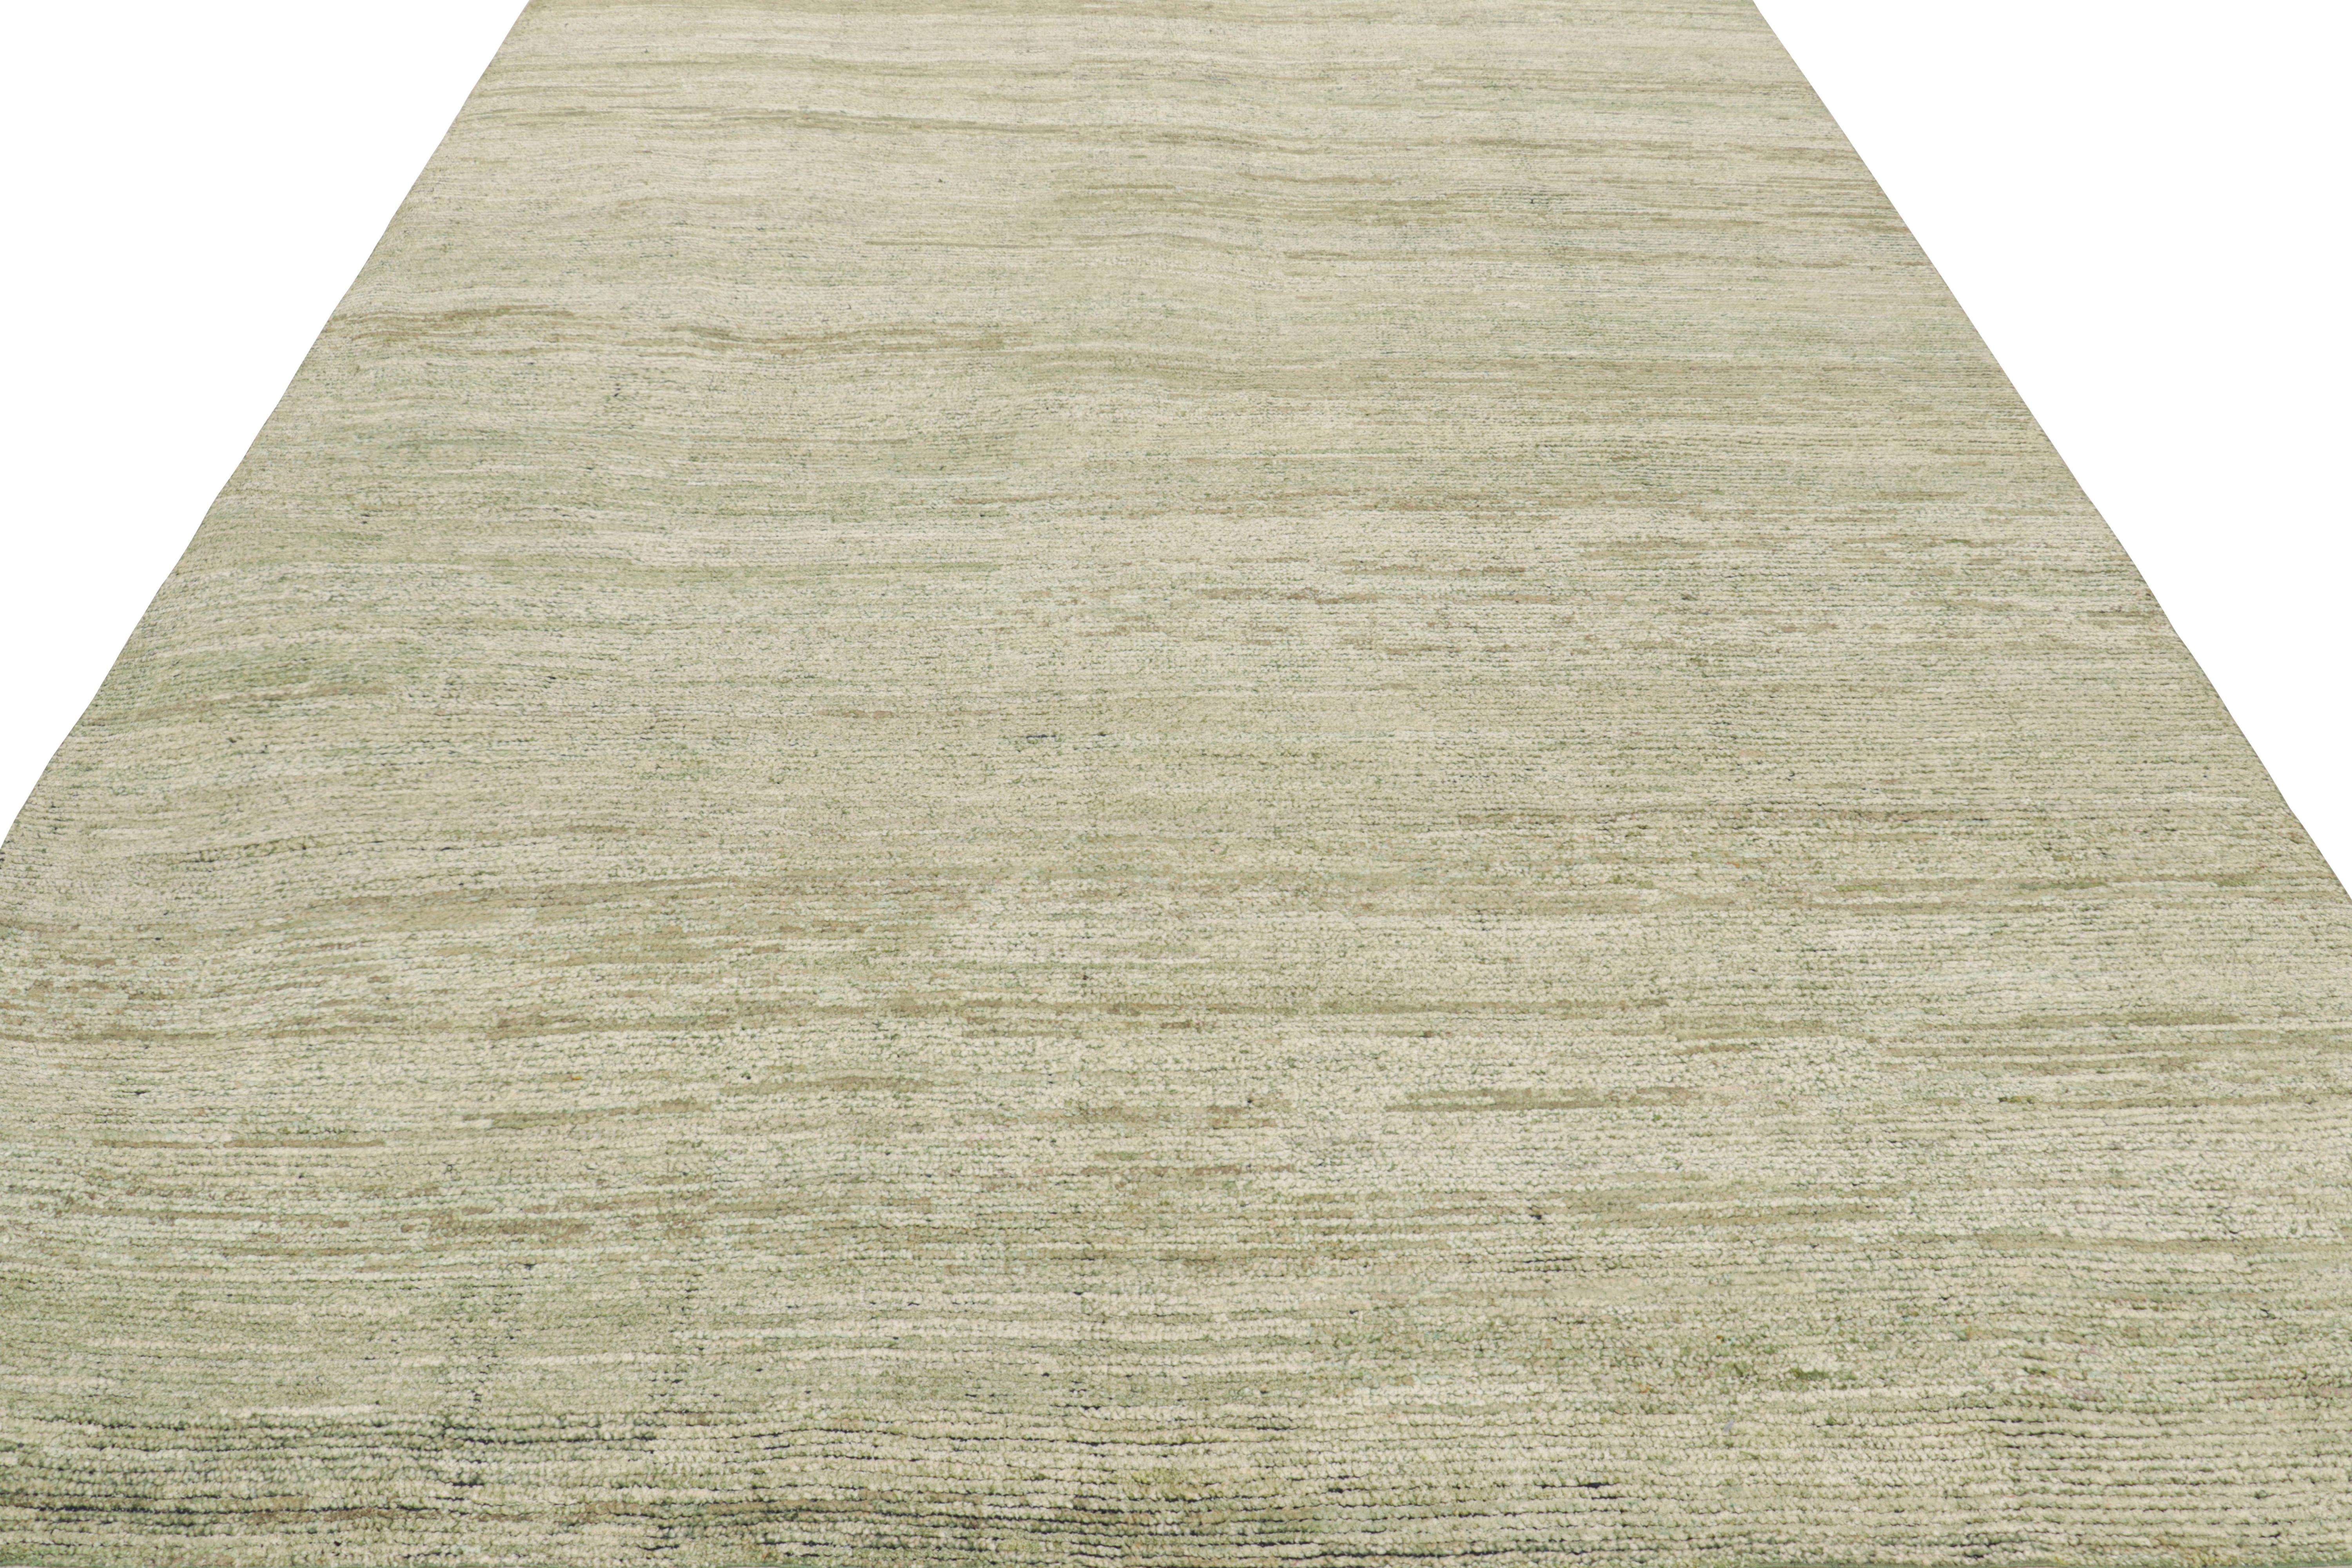 Indian Rug & Kilim’s Contemporary Textural Rug in Green and Beige Tones and Striae For Sale